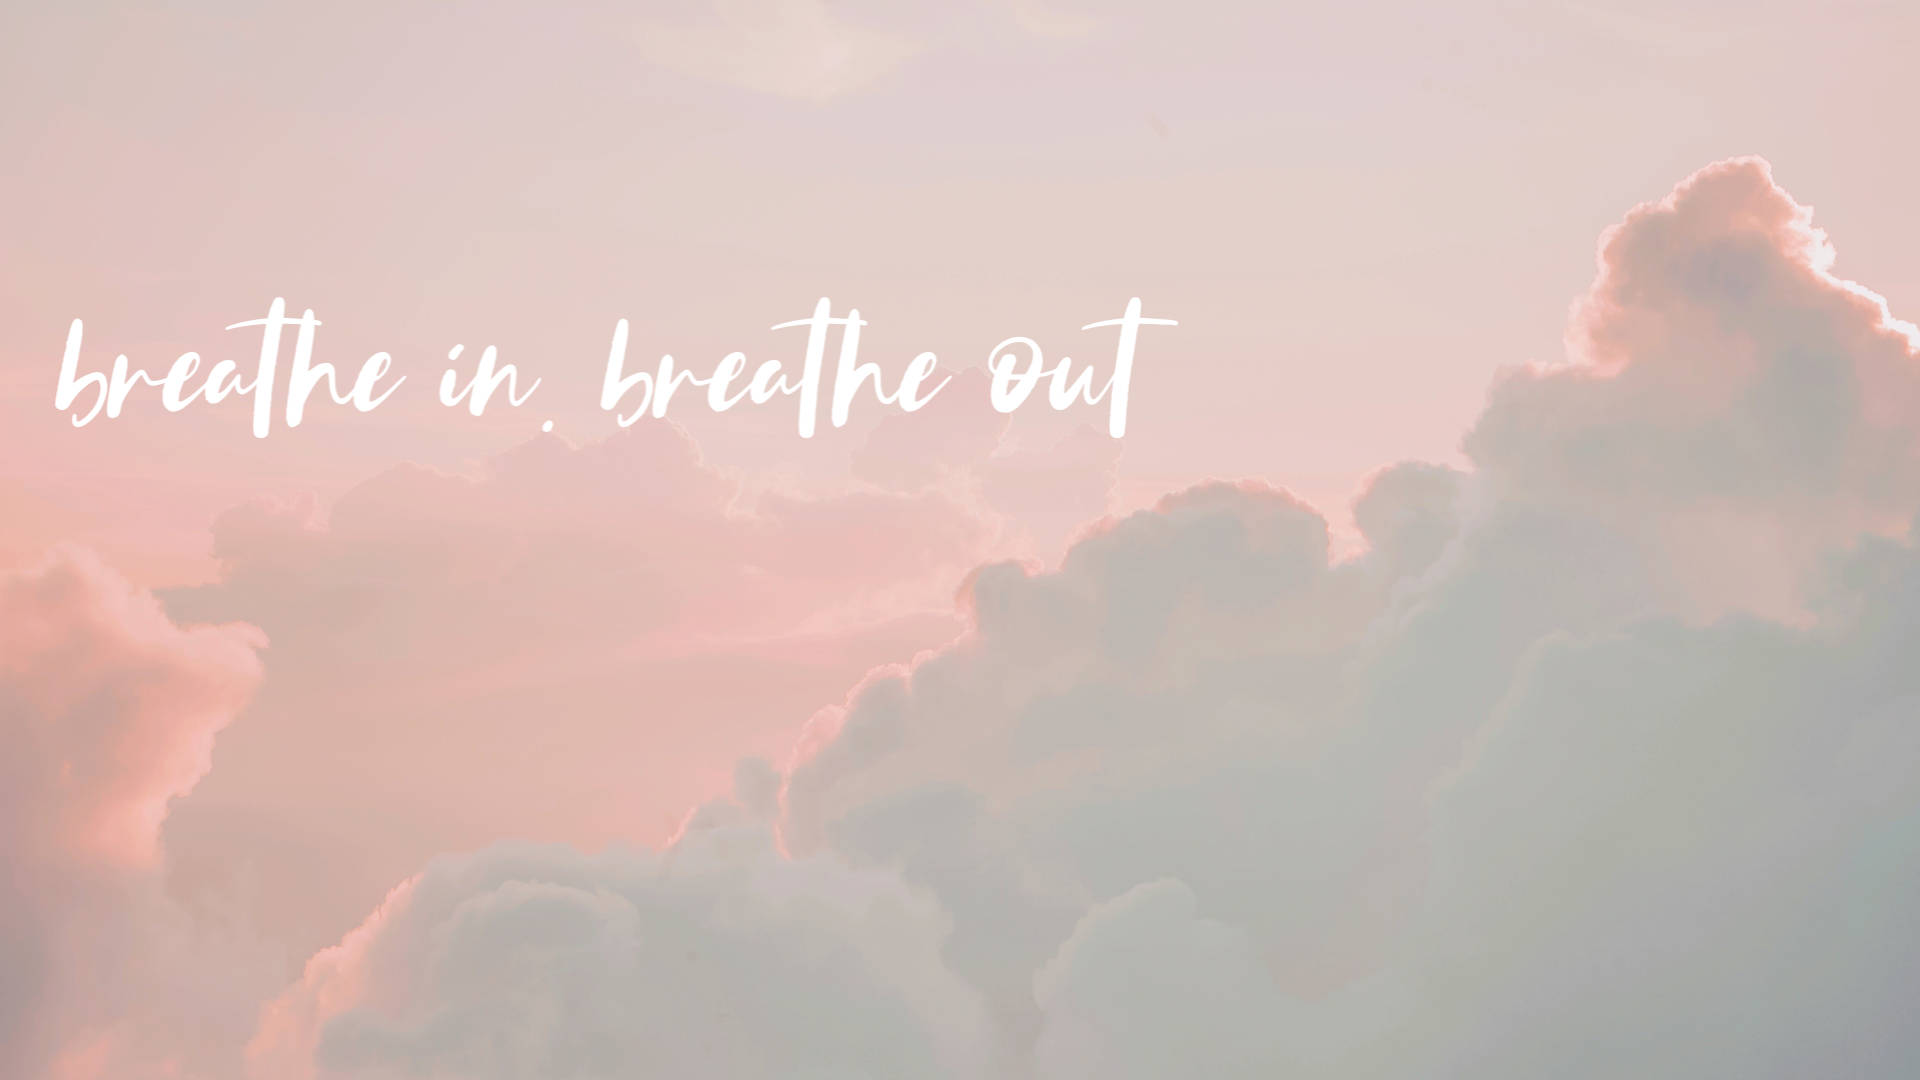 Breathe In Breathe Out Pastel Aesthetic Tumblr Laptop Wallpaper